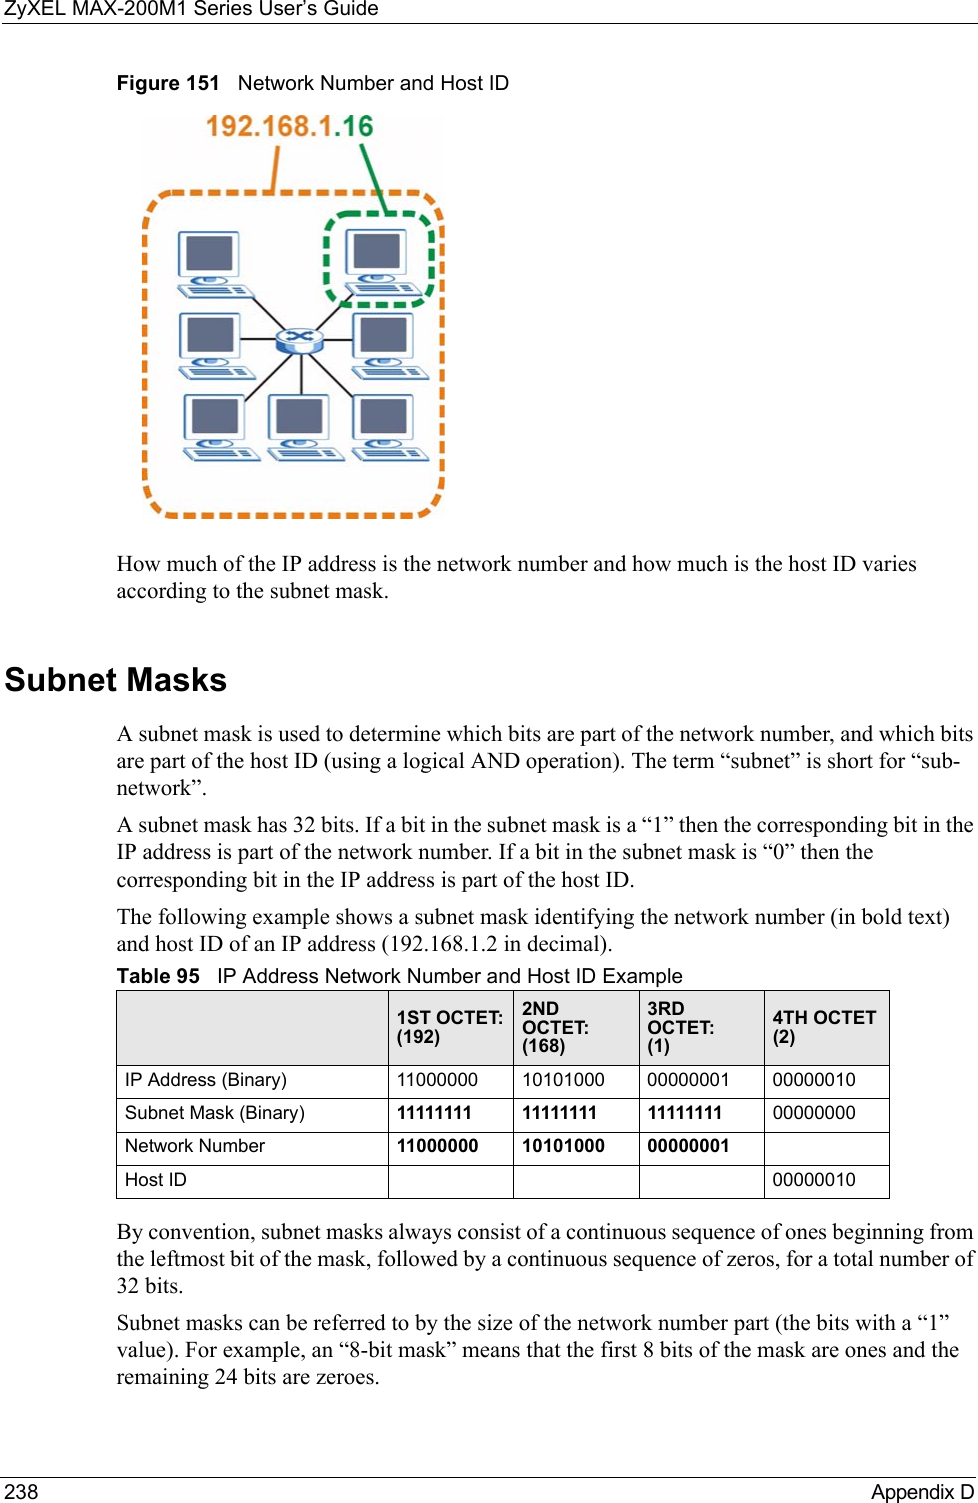 ZyXEL MAX-200M1 Series User’s Guide238 Appendix DFigure 151   Network Number and Host IDHow much of the IP address is the network number and how much is the host ID varies according to the subnet mask.  Subnet MasksA subnet mask is used to determine which bits are part of the network number, and which bits are part of the host ID (using a logical AND operation). The term “subnet” is short for “sub-network”.A subnet mask has 32 bits. If a bit in the subnet mask is a “1” then the corresponding bit in the IP address is part of the network number. If a bit in the subnet mask is “0” then the corresponding bit in the IP address is part of the host ID. The following example shows a subnet mask identifying the network number (in bold text) and host ID of an IP address (192.168.1.2 in decimal).By convention, subnet masks always consist of a continuous sequence of ones beginning from the leftmost bit of the mask, followed by a continuous sequence of zeros, for a total number of 32 bits.Subnet masks can be referred to by the size of the network number part (the bits with a “1” value). For example, an “8-bit mask” means that the first 8 bits of the mask are ones and the remaining 24 bits are zeroes.Table 95   IP Address Network Number and Host ID Example1ST OCTET:(192)2ND OCTET:(168)3RD OCTET:(1)4TH OCTET(2)IP Address (Binary) 11000000 10101000 00000001 00000010Subnet Mask (Binary) 11111111 11111111 11111111 00000000Network Number 11000000 10101000 00000001Host ID 00000010